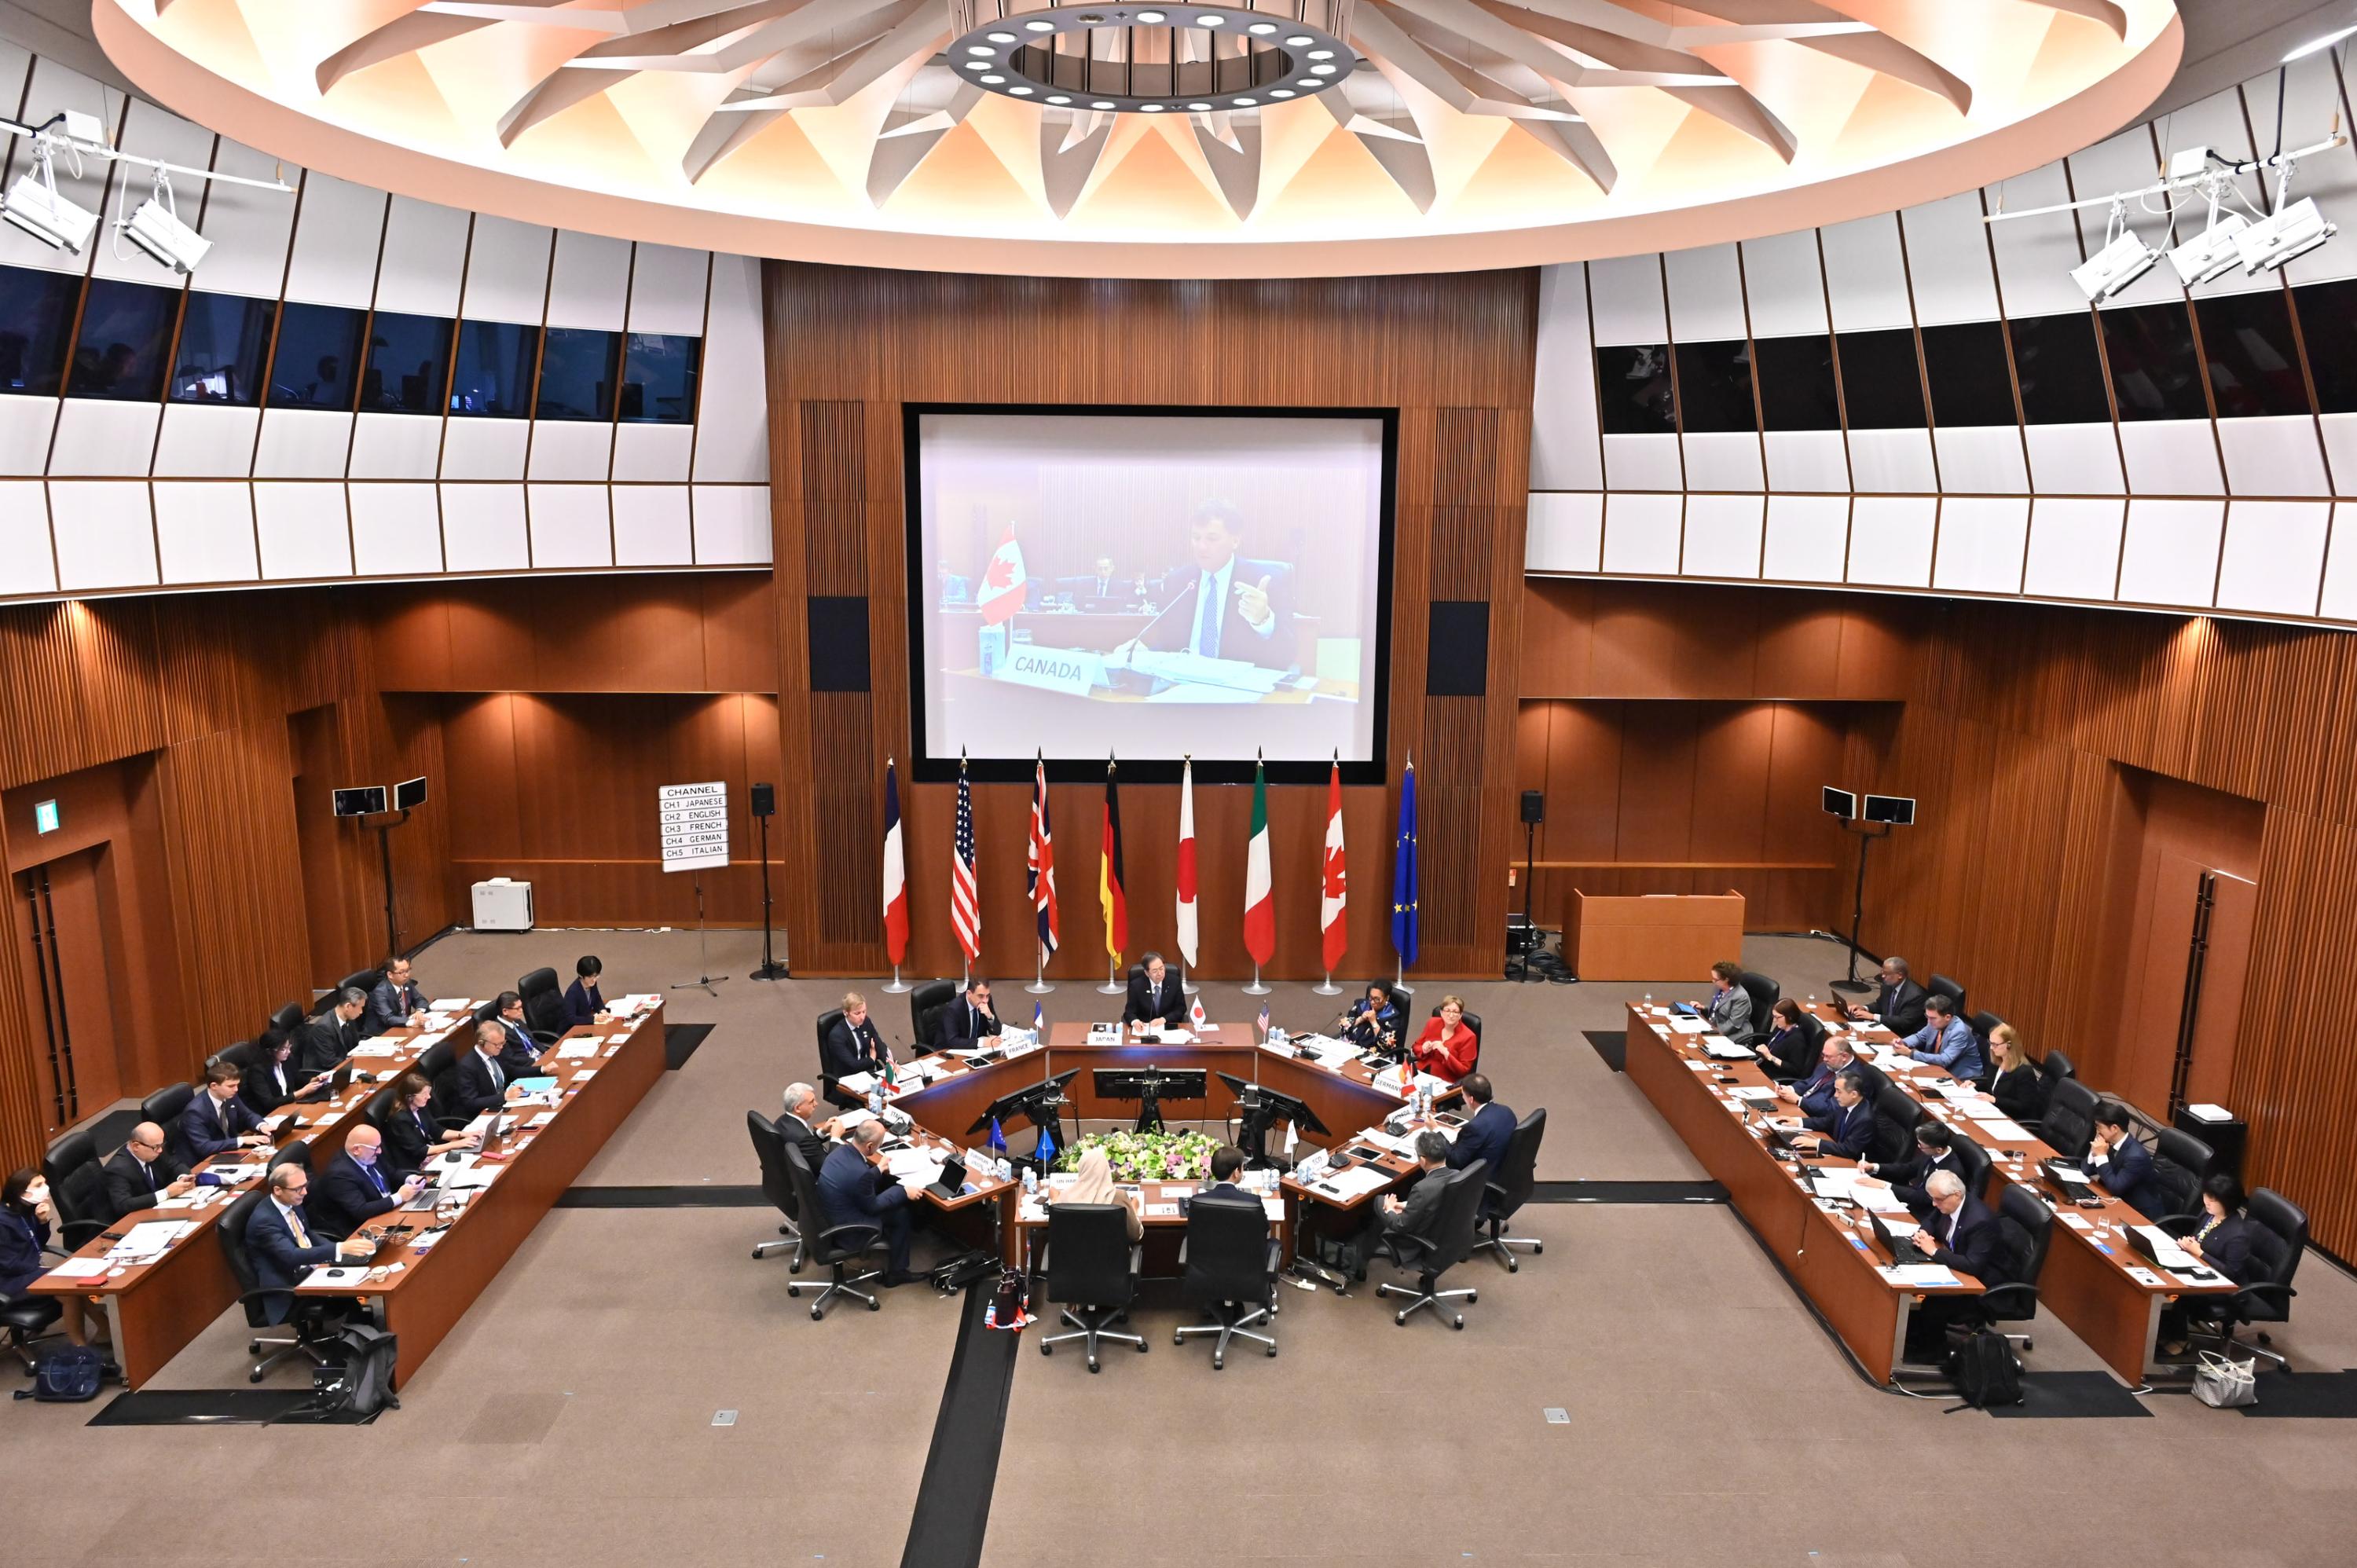 G7 Sustainable Urban Development Ministers' Meeting.